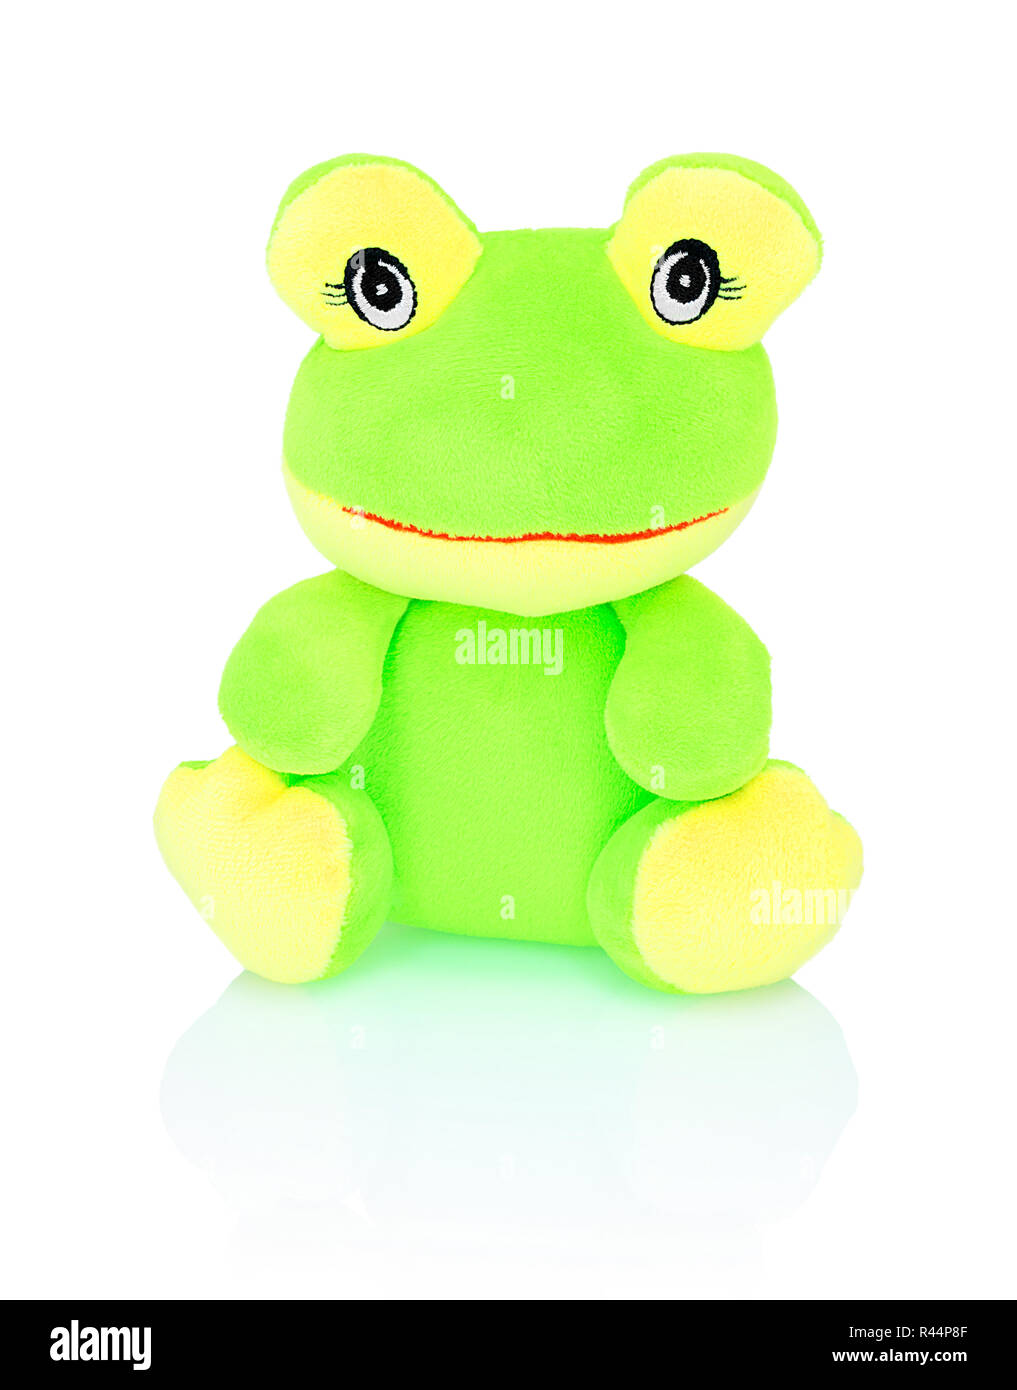 Neon green frog plushie toy isolated on white background with